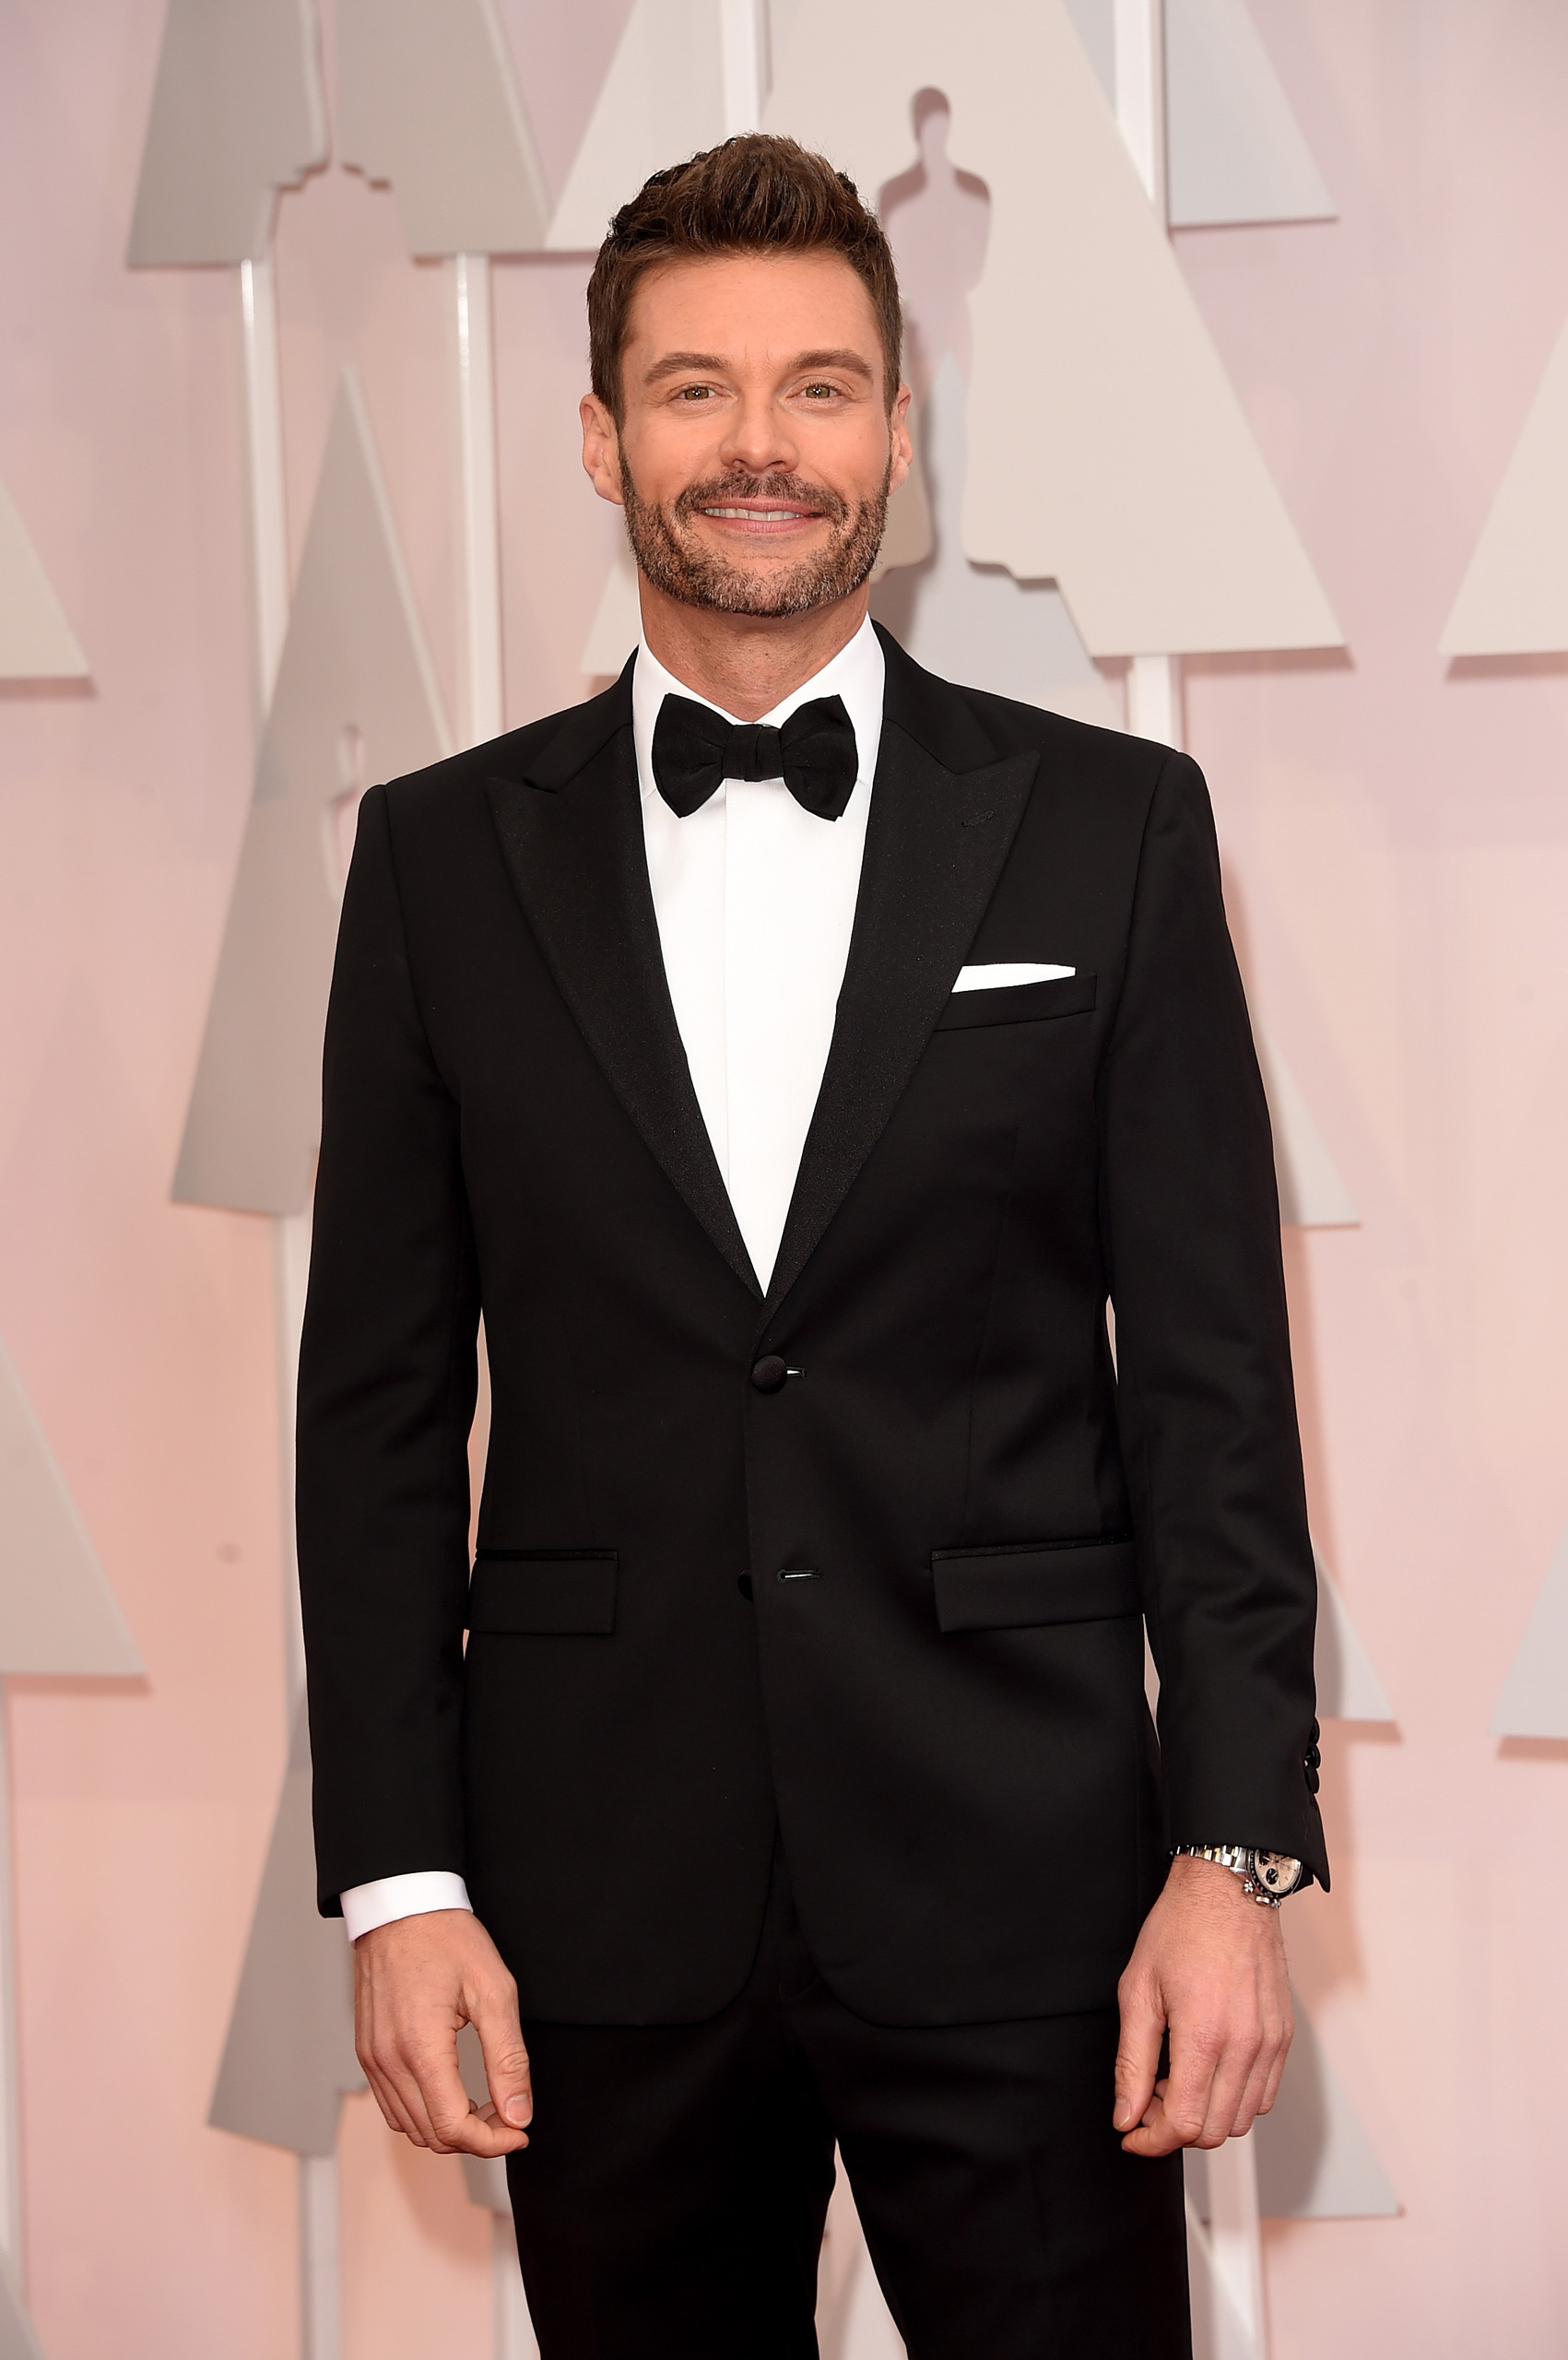 Ryan Seacrest attends the 87th Annual Academy Awards on Feb. 22, 2015 in Hollywood, Calif.